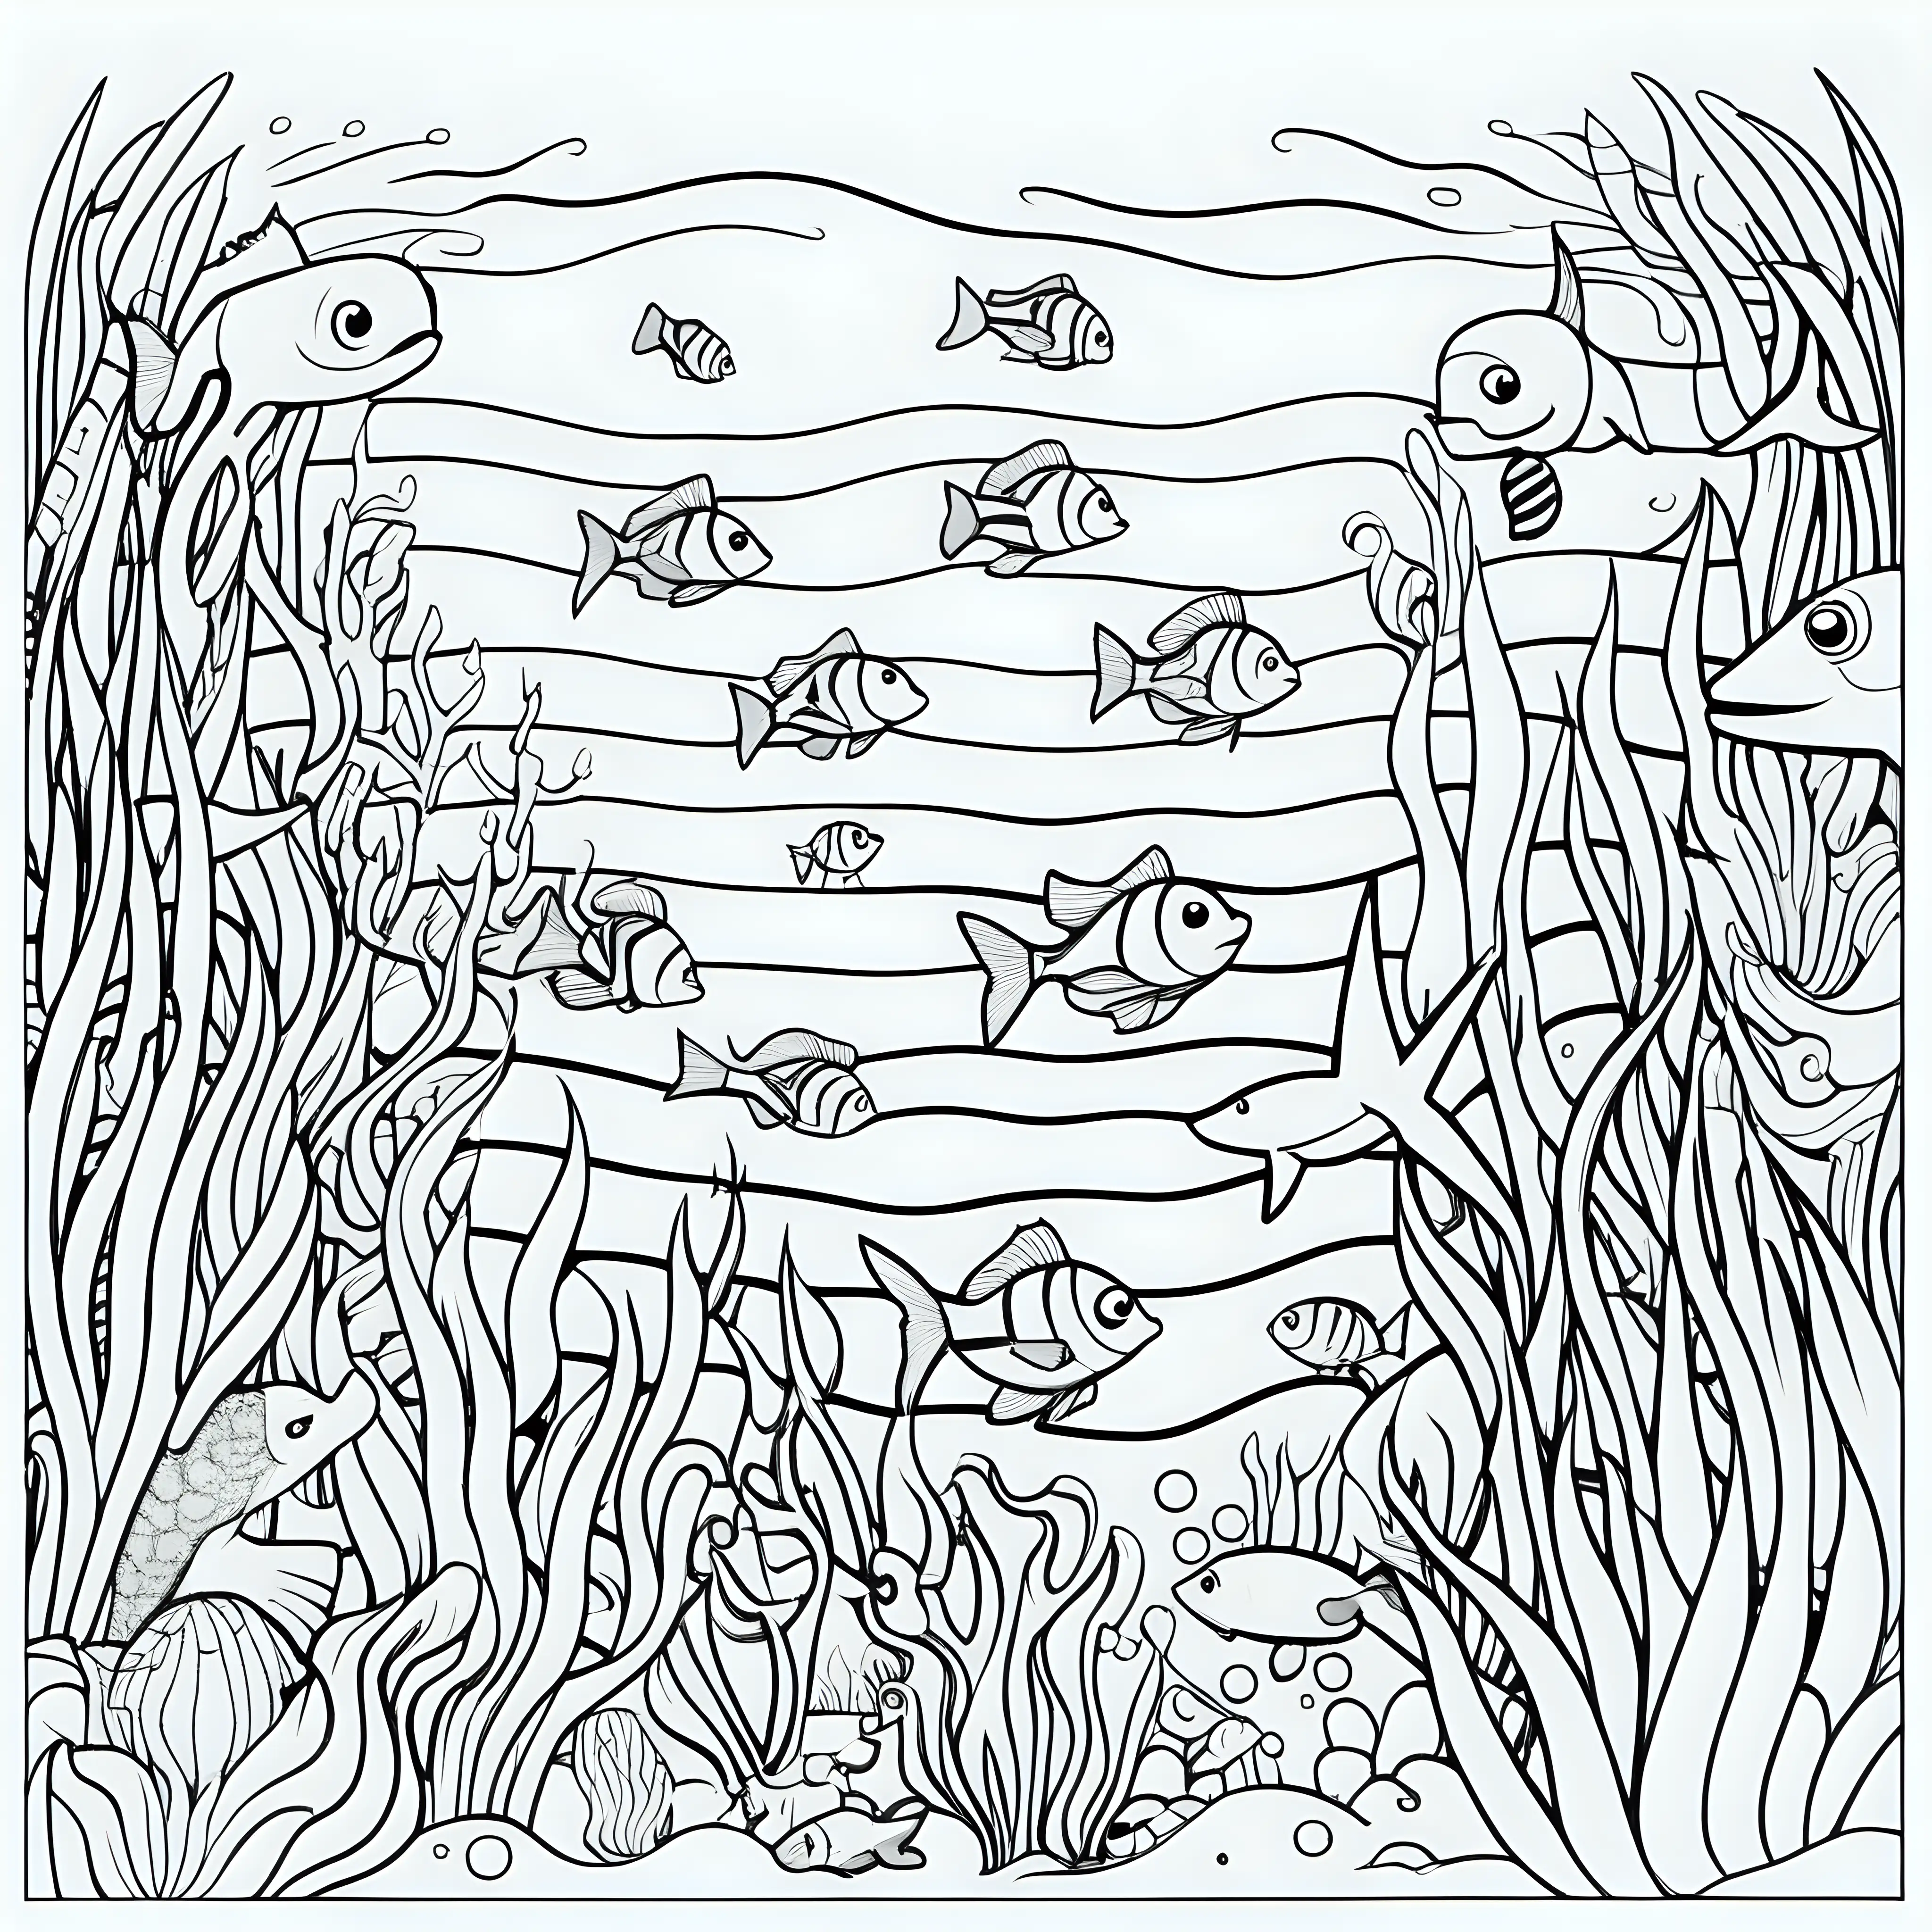 Underwater Sea Creatures Coloring Page for Kids